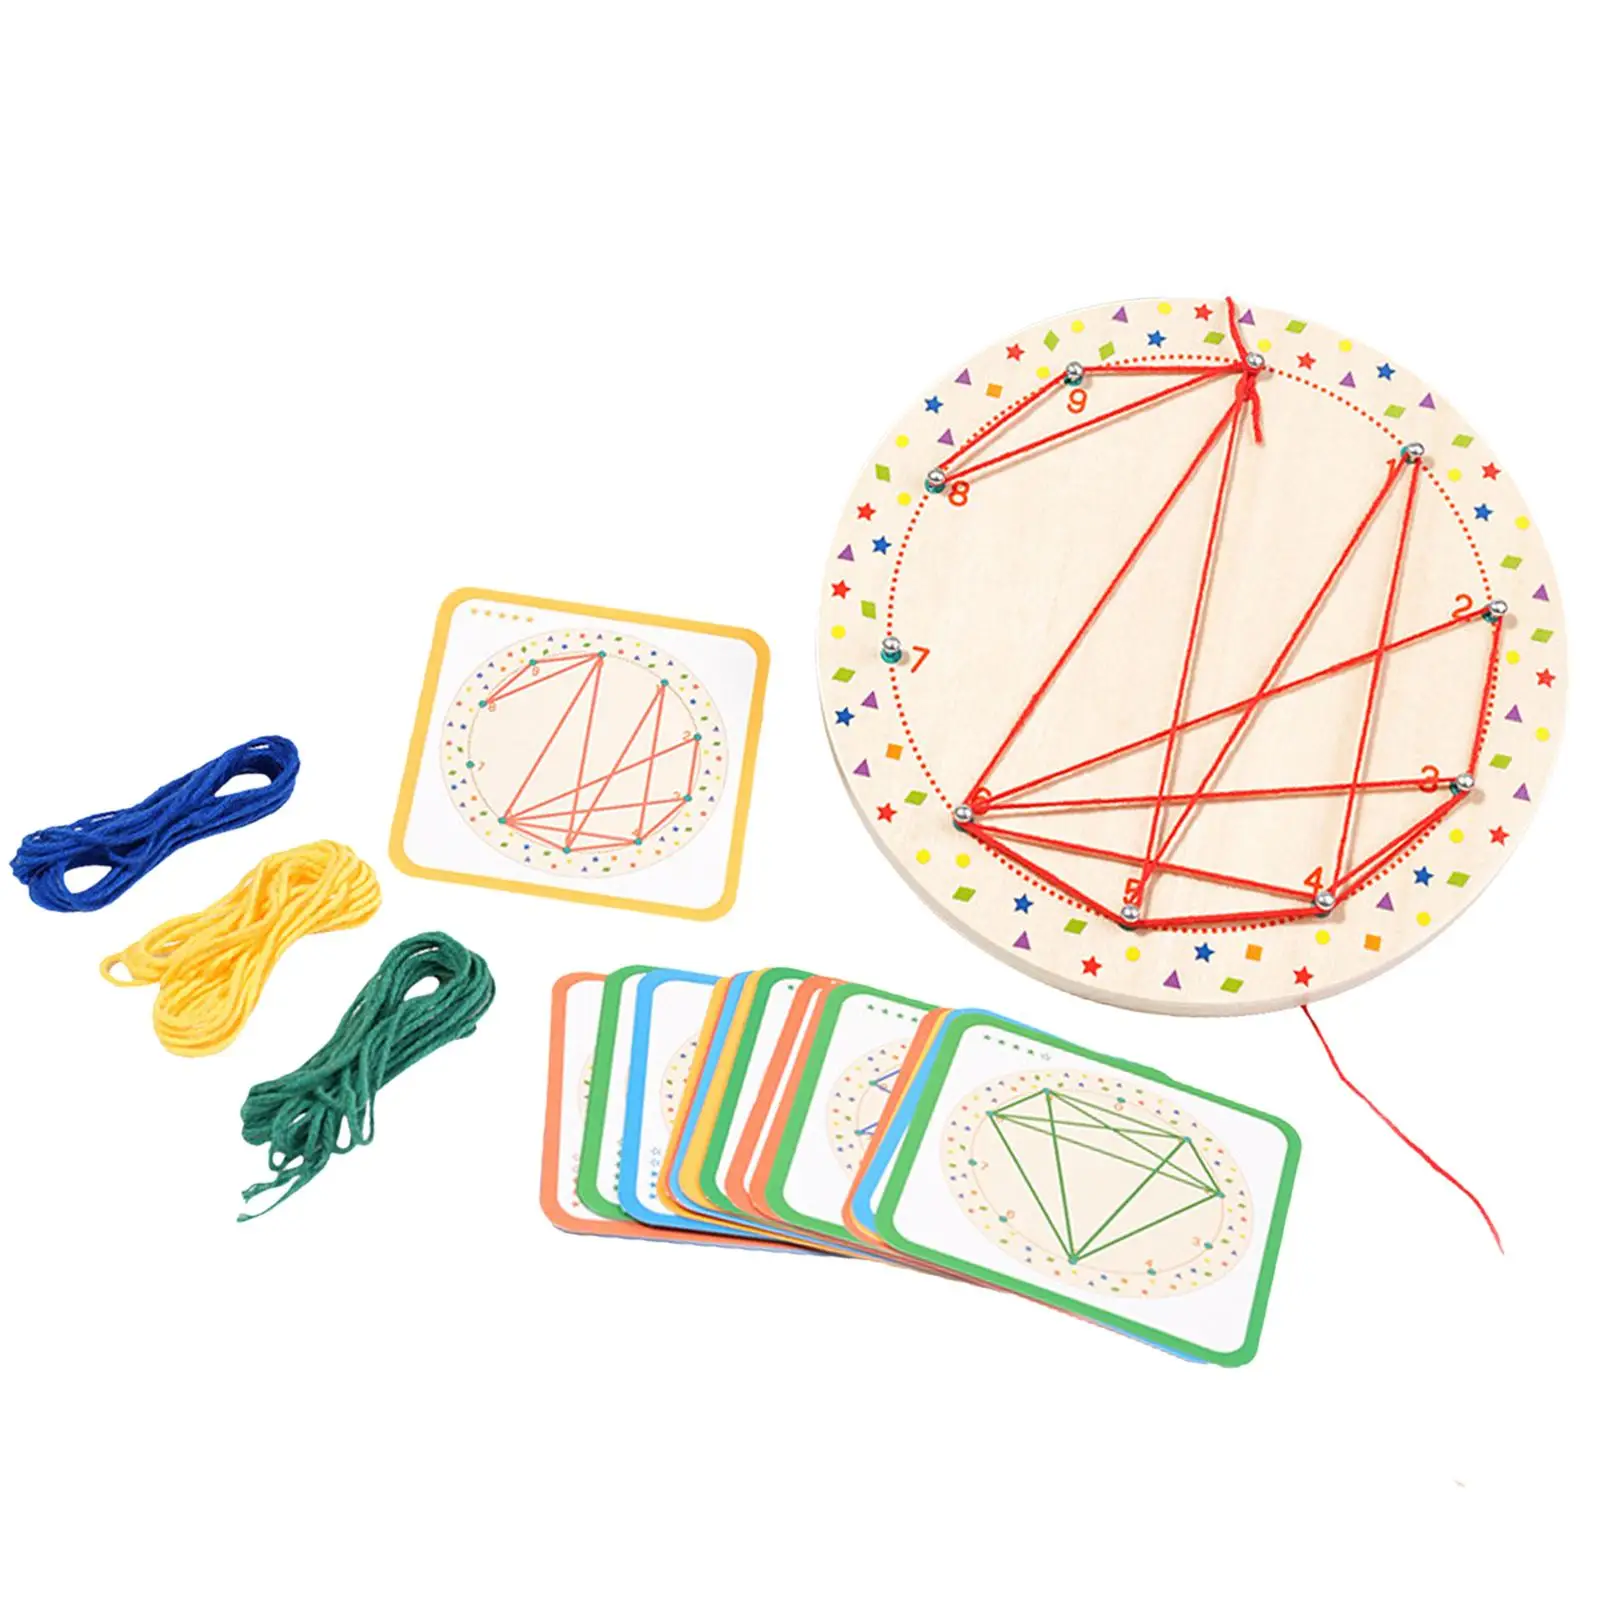 Wooden Threading Board with 20 Lacing Cards Shape Lacing Projects for Children Birthday Gift Ages 3 4 5 Years Old Activity